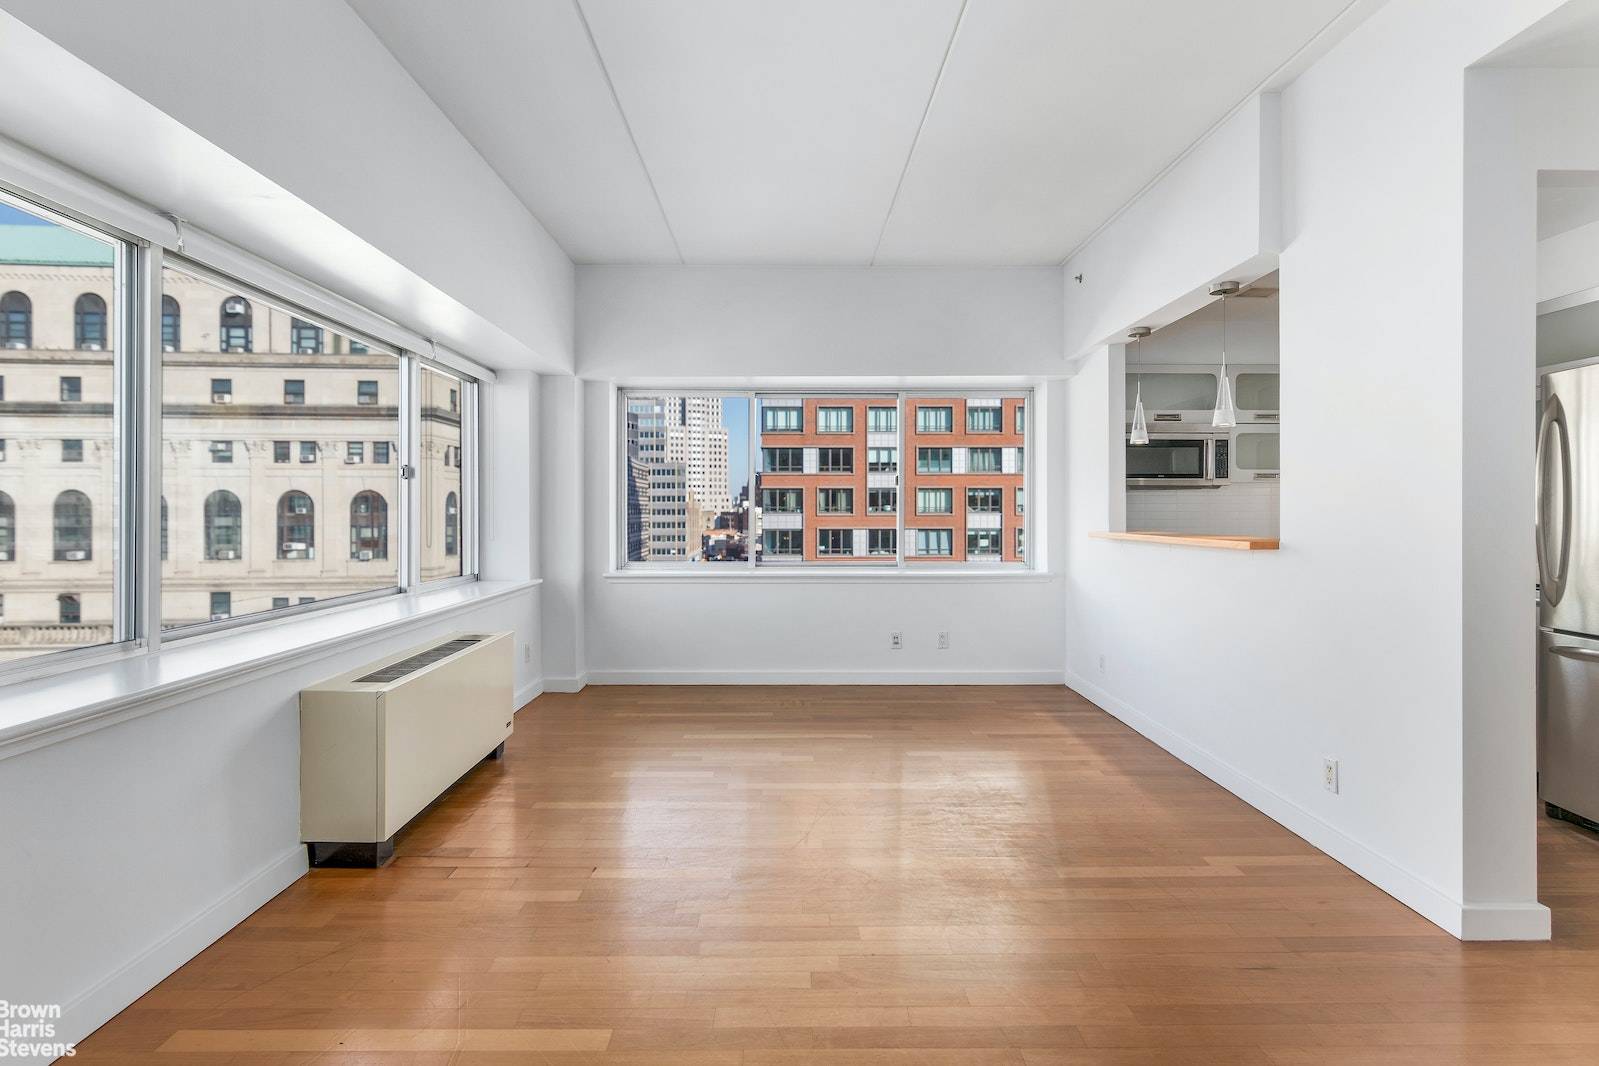 Apt 9A at 87 Smith Street is a 1 bedroom 1 bath home offering a spacious layout and fantastic views The ninth floor location and oversized windows ensure plenty of ...